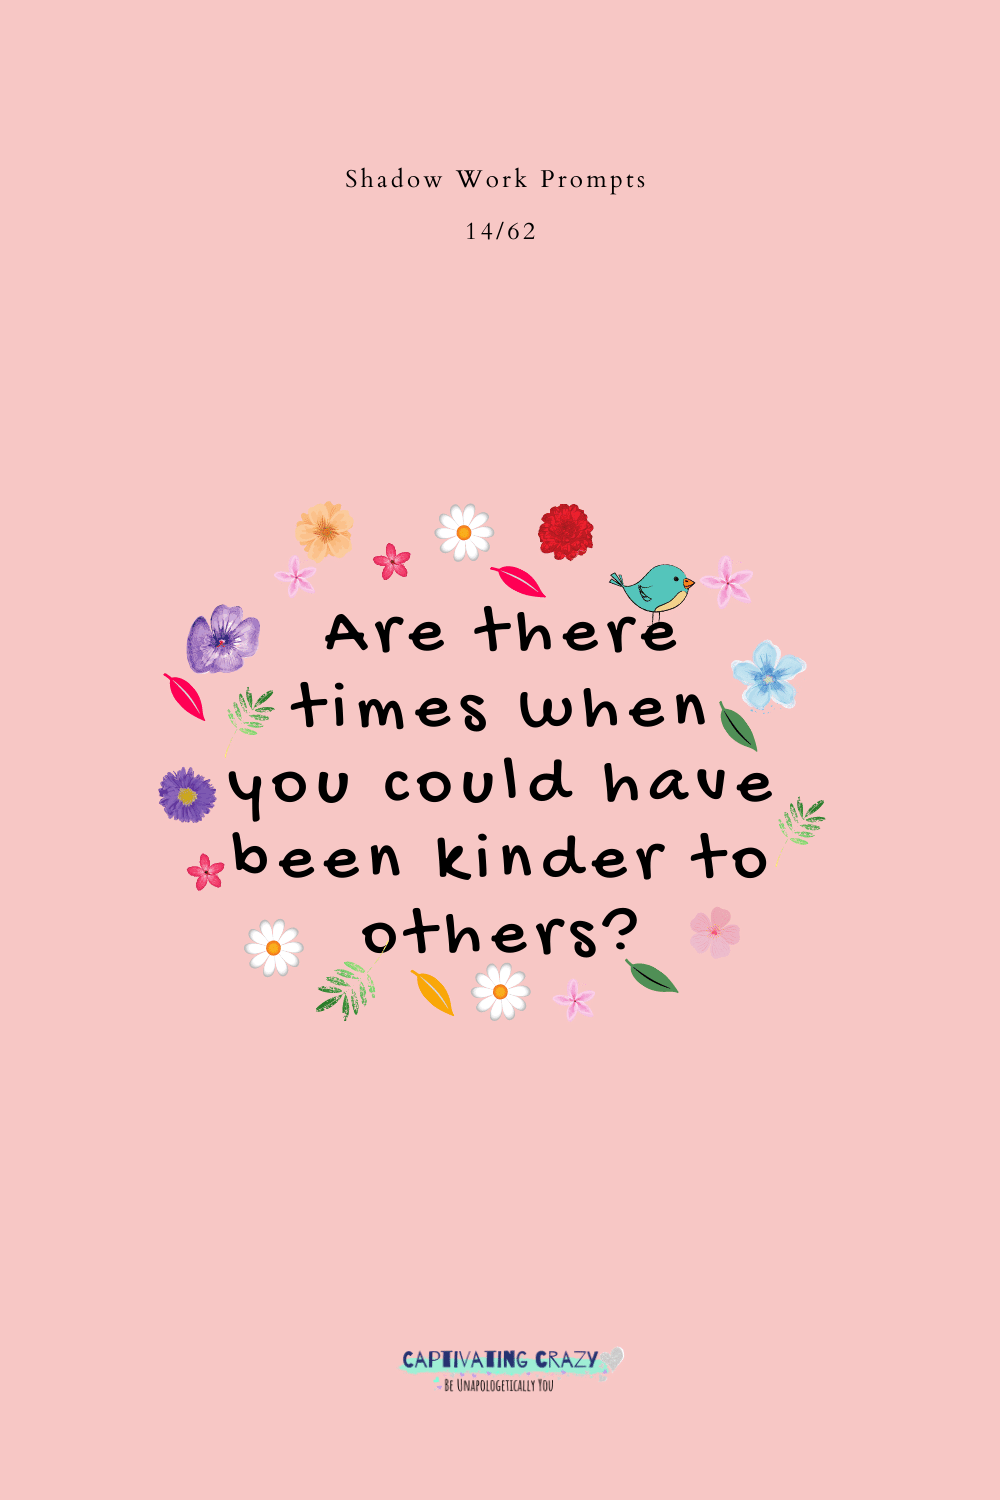 Are there times when you could have been kinder to others?